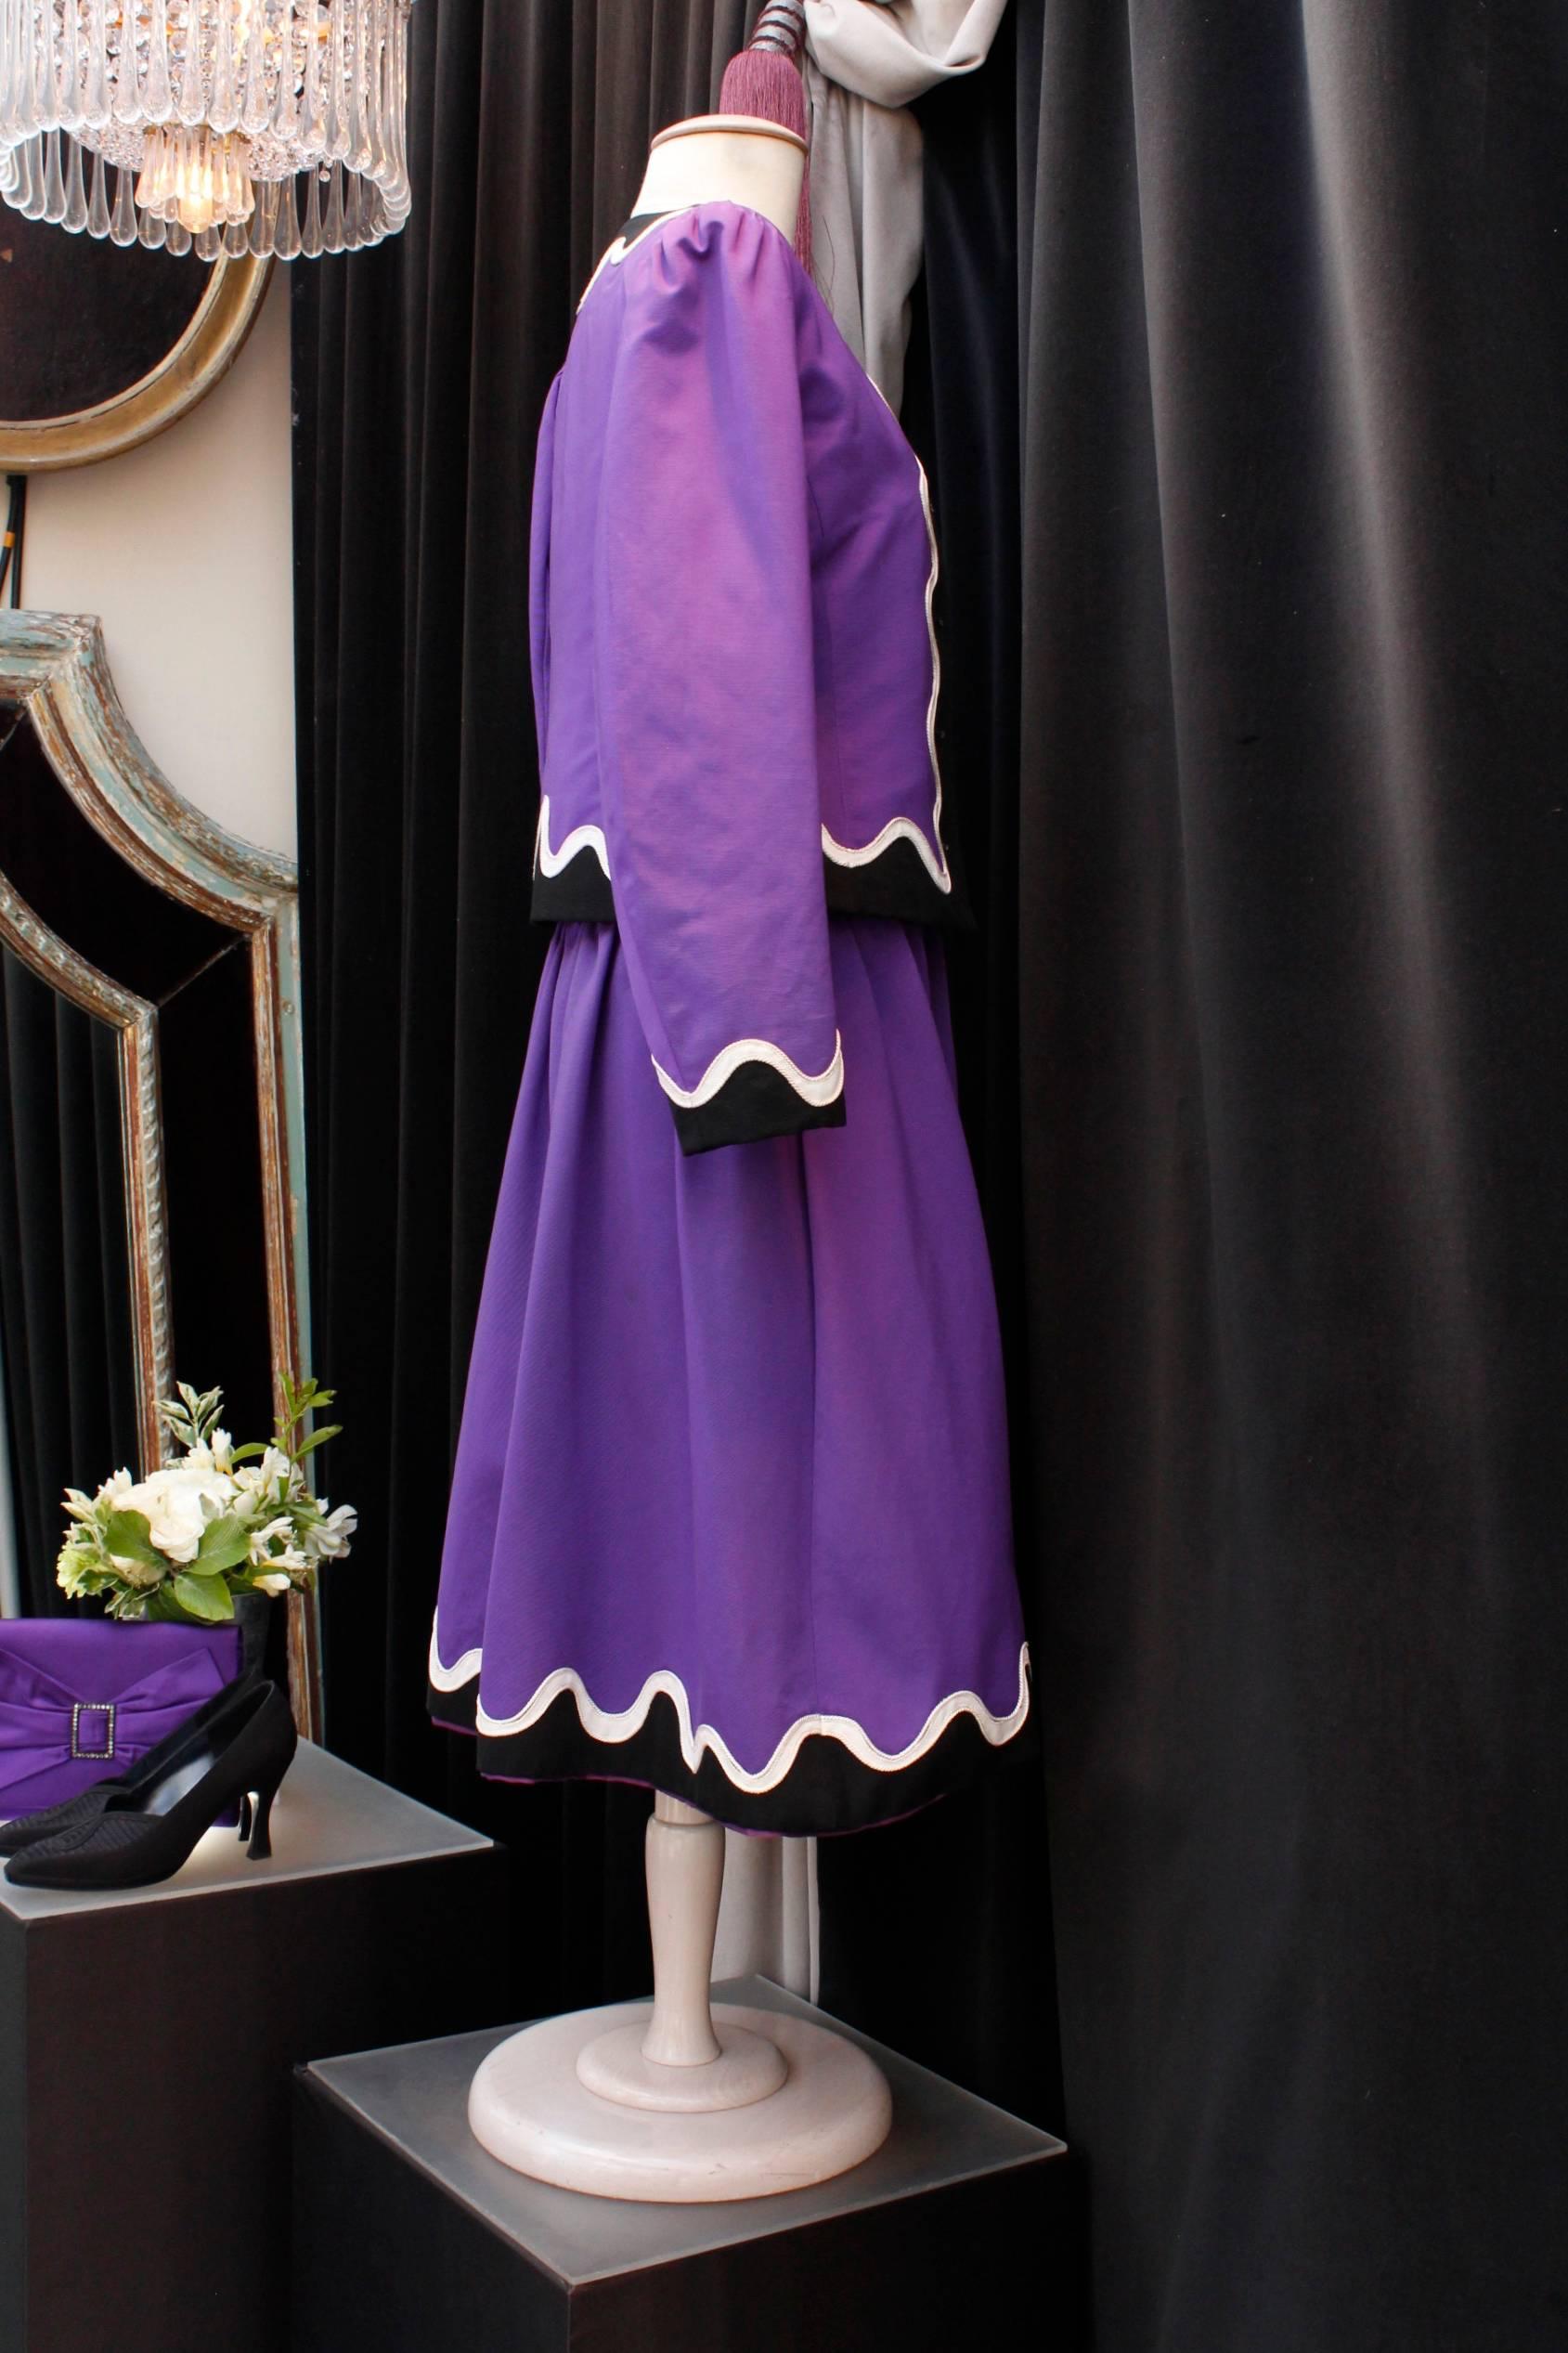 YVES SAINT LAURENT RIVE GAUCHE (Made in France) Dress and short jacket set in purple color, decorated with black passementerie and black and white fabric with wave pattern at jacket and dress edges and neckline. Calf length dress with thin shoulder